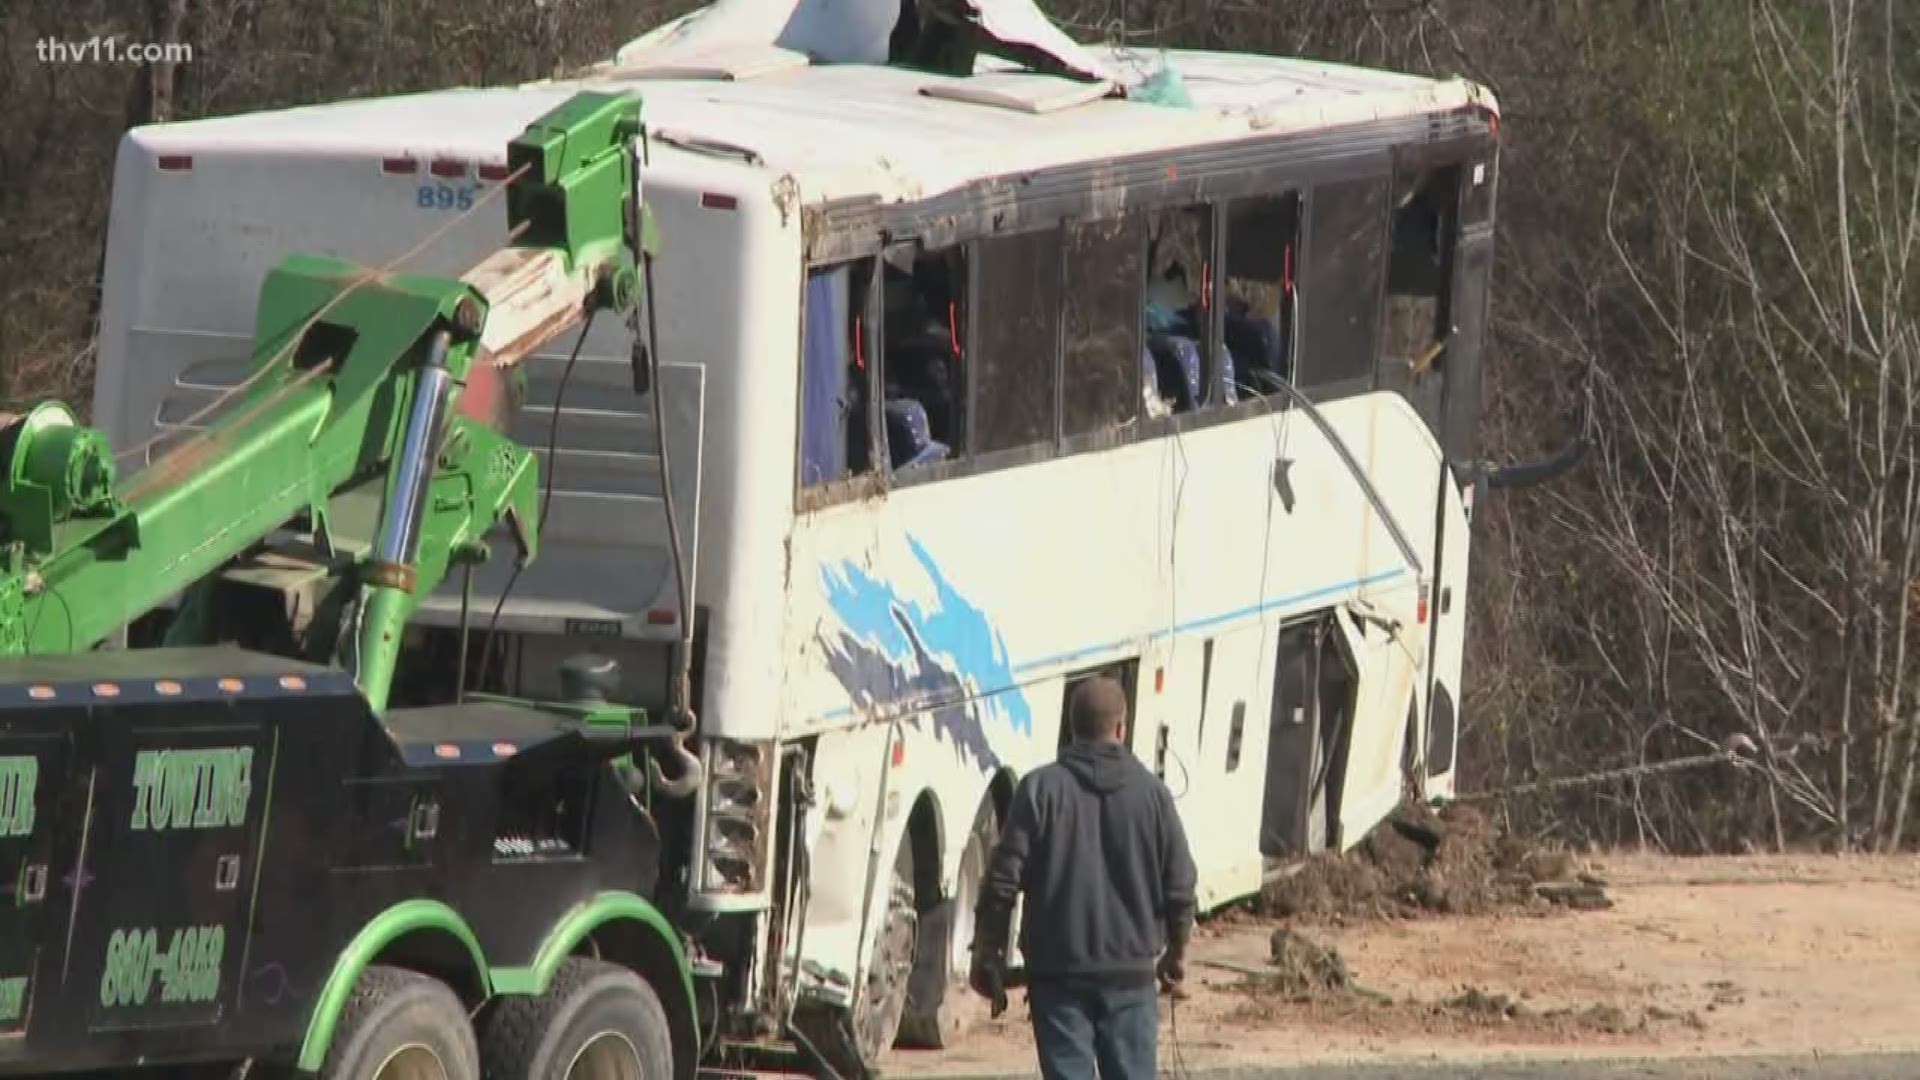 What started as a positive experience for a youth football team from Memphis, ends in tragedy after the bus carrying the team crashed overnight in Saline County.